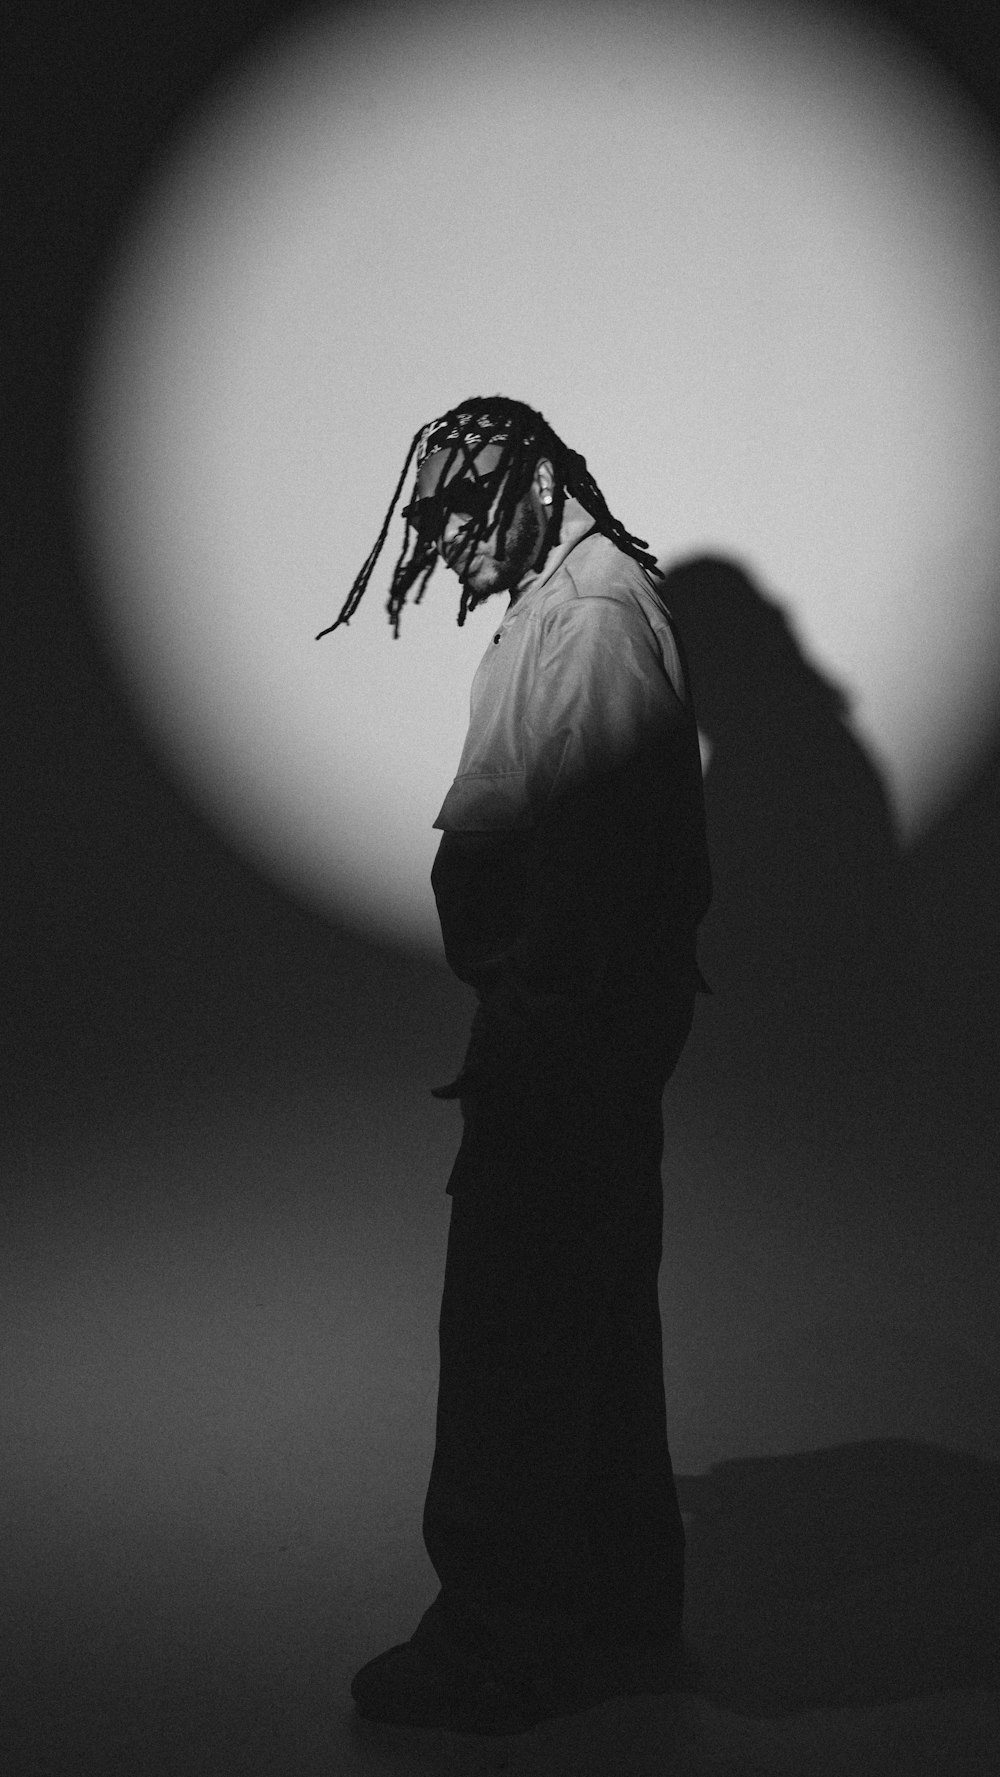 a black and white photo of a person with dreadlocks